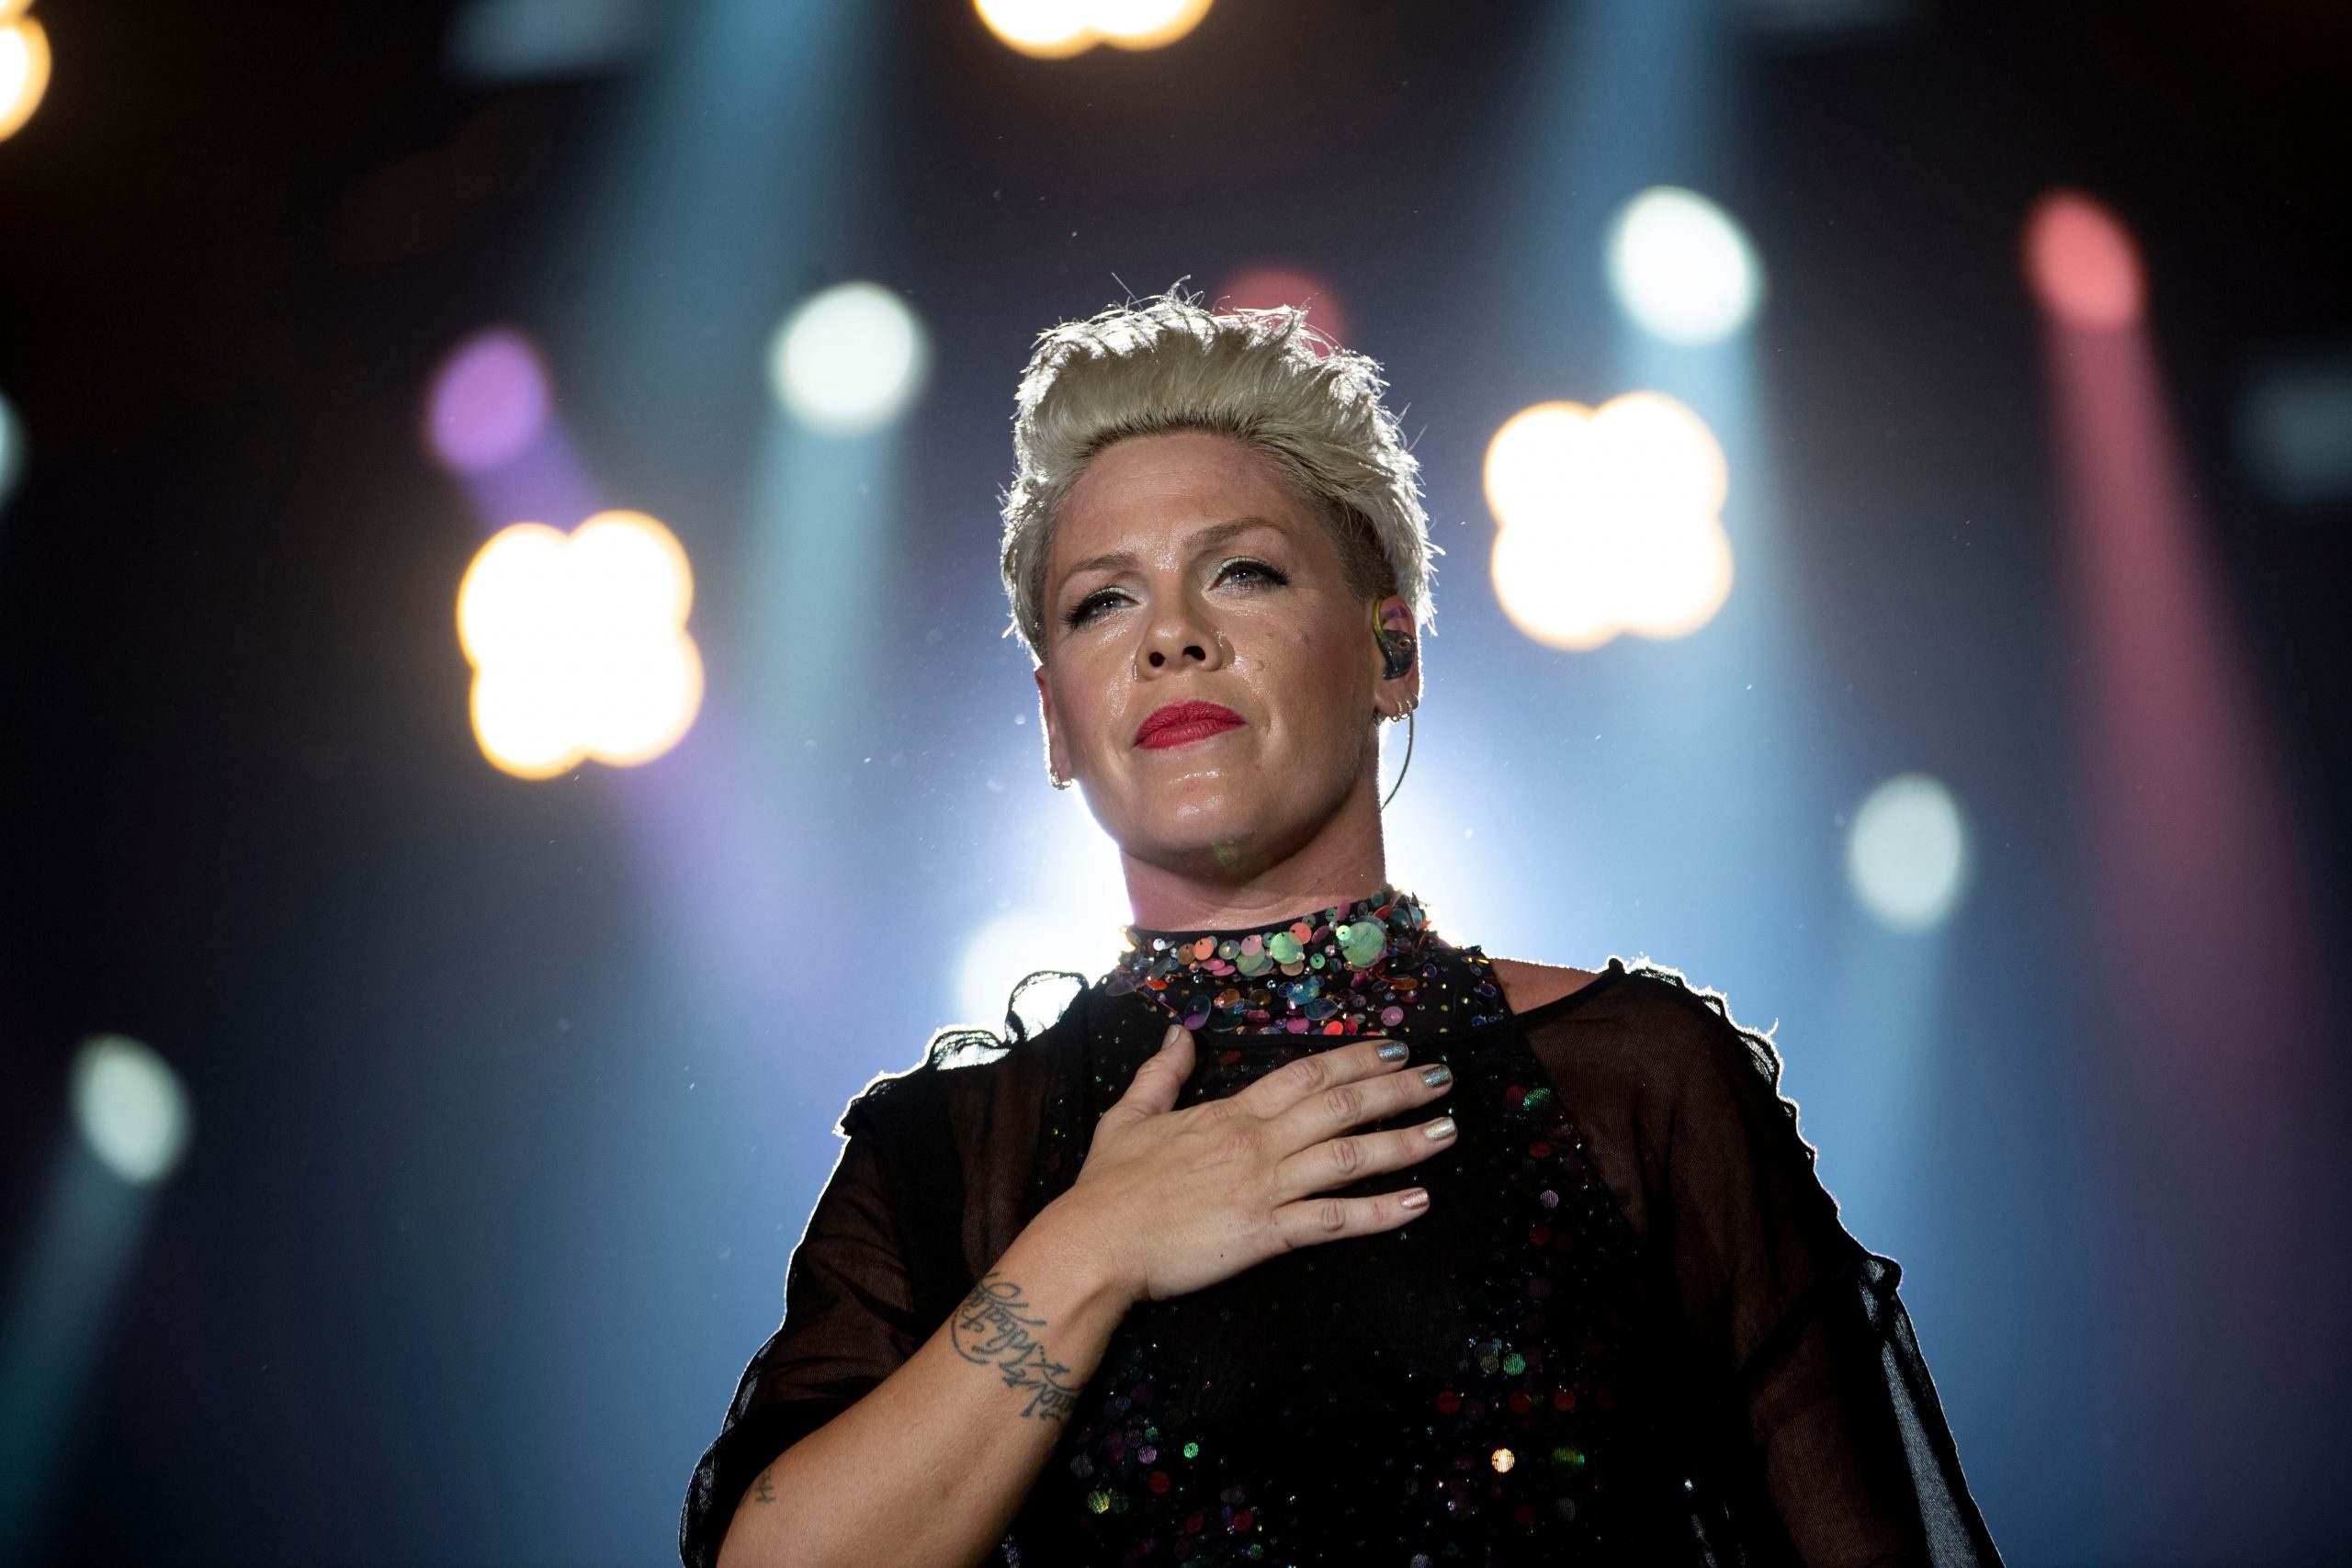 P!nk, Singer pink and her 3 year old son, Recover after testing positive, 2560x1710 HD Desktop